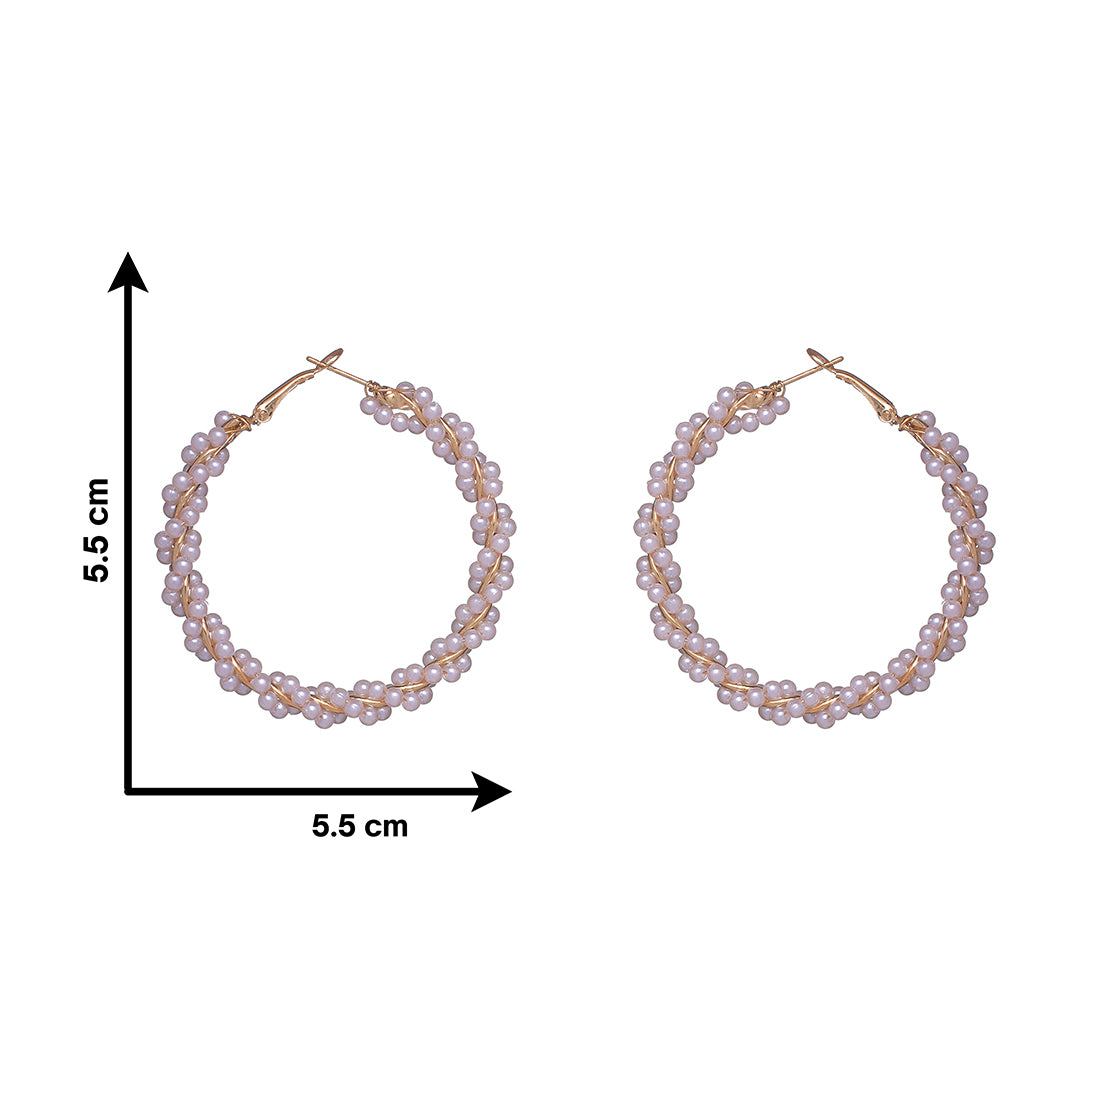 Oversized Pearl Studded Gold-Toned Circular Hoop Earrings